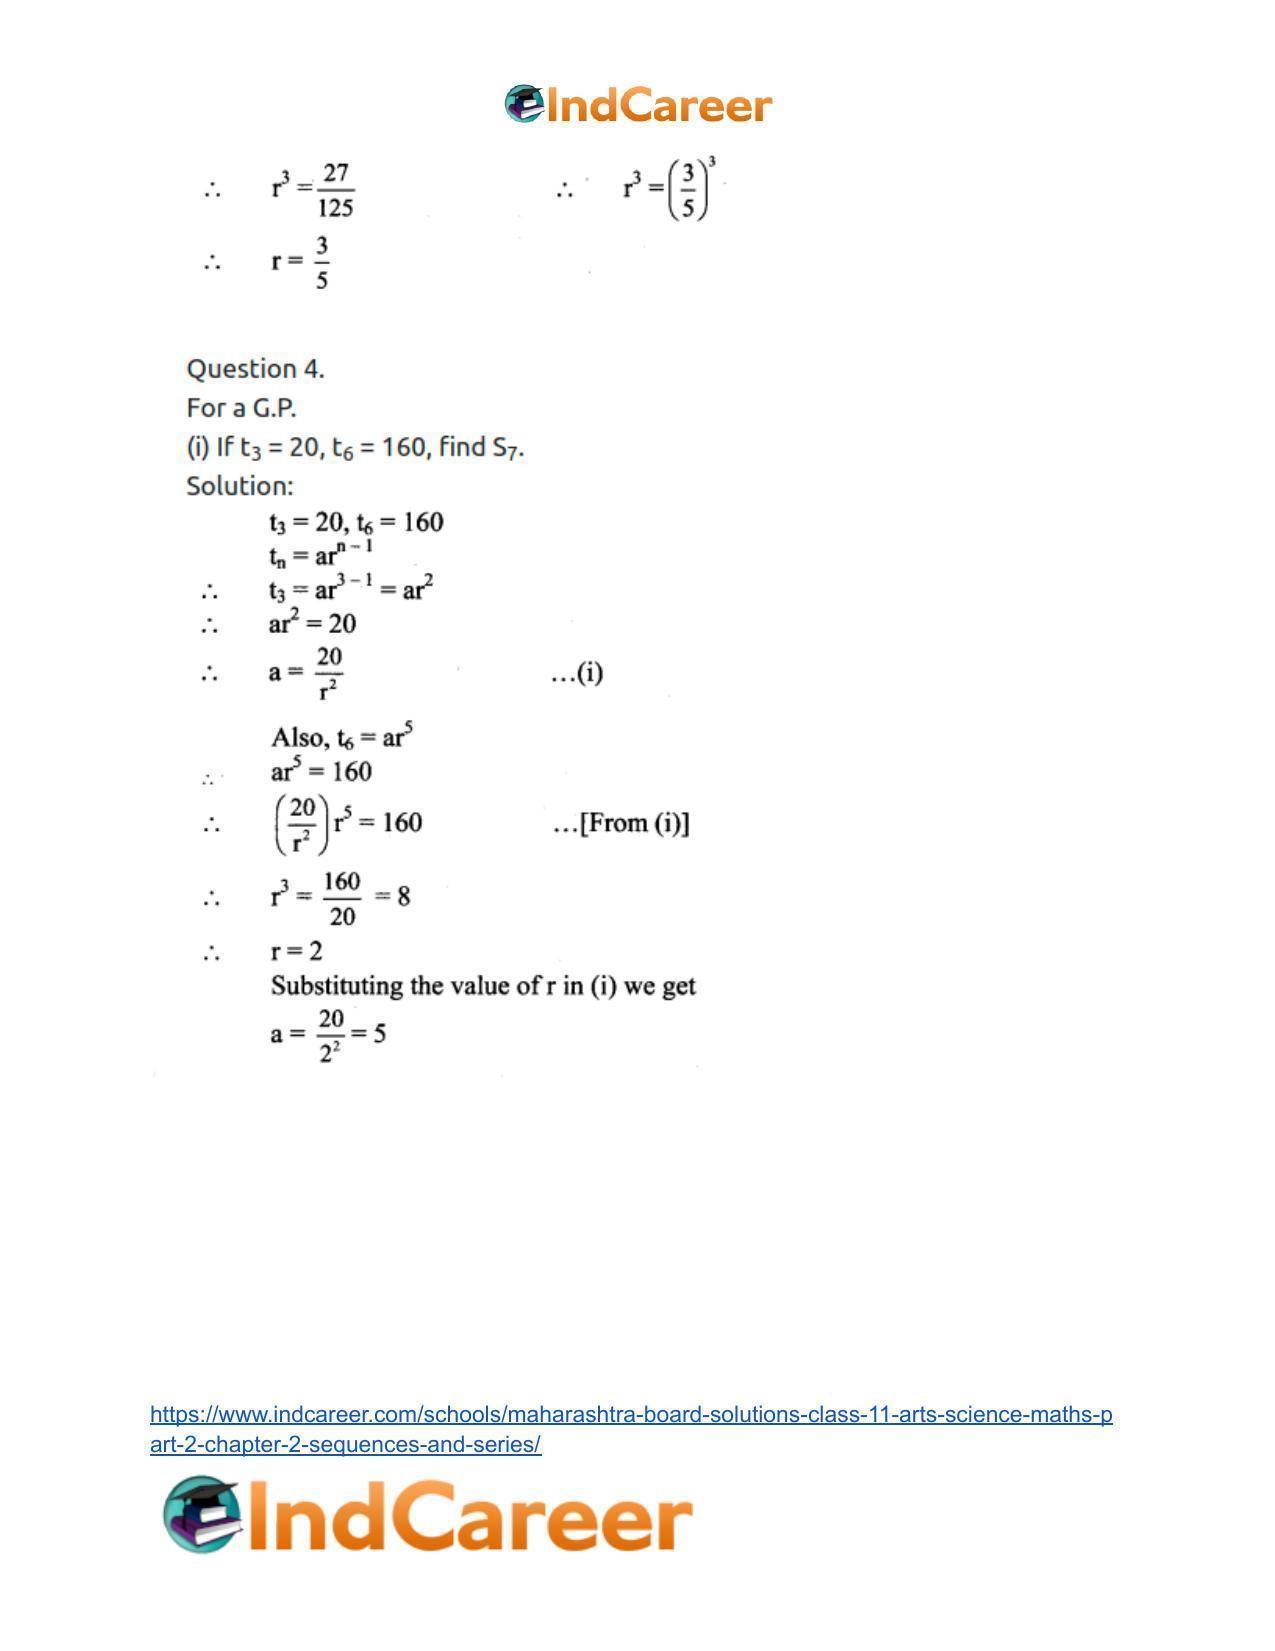 Maharashtra Board Solutions Class 11-Arts & Science Maths (Part 2): Chapter 2- Sequences and Series - Page 27